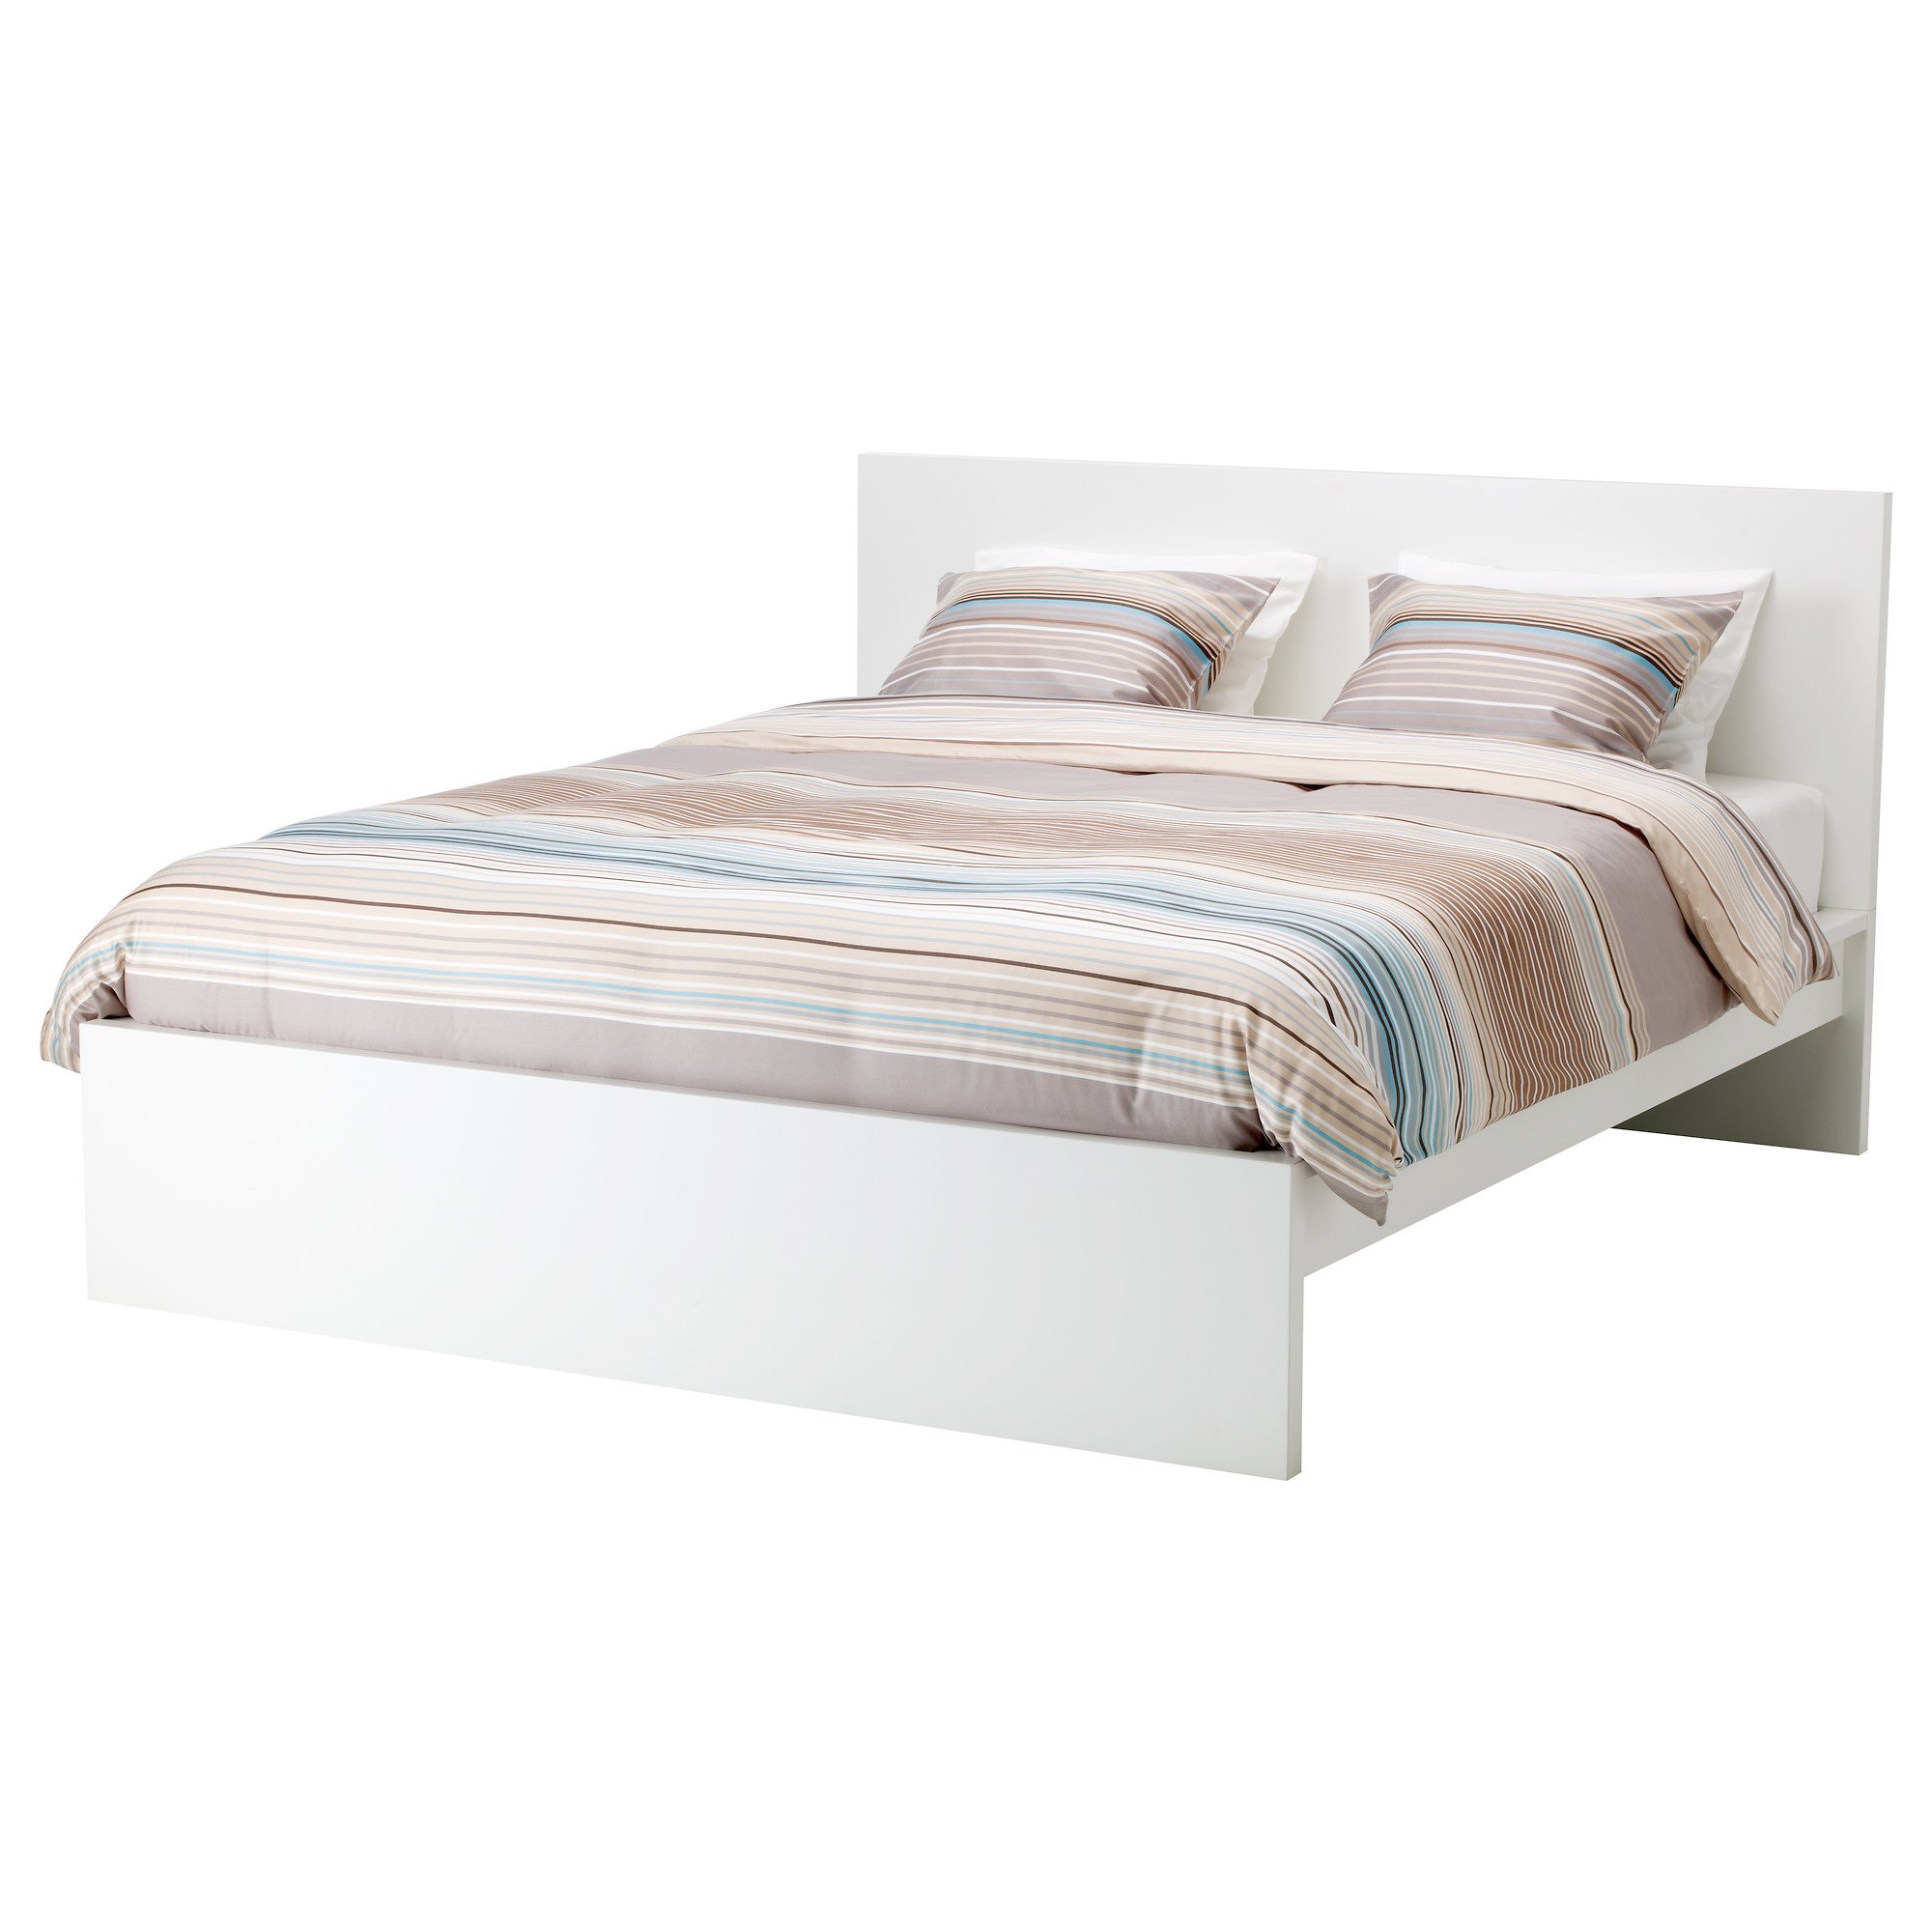 Nice Ikea Queen Size Bed IKEA MALM Bed Frame, High Adjustable Bed Sides Allow You To Use Mattresses Of Different